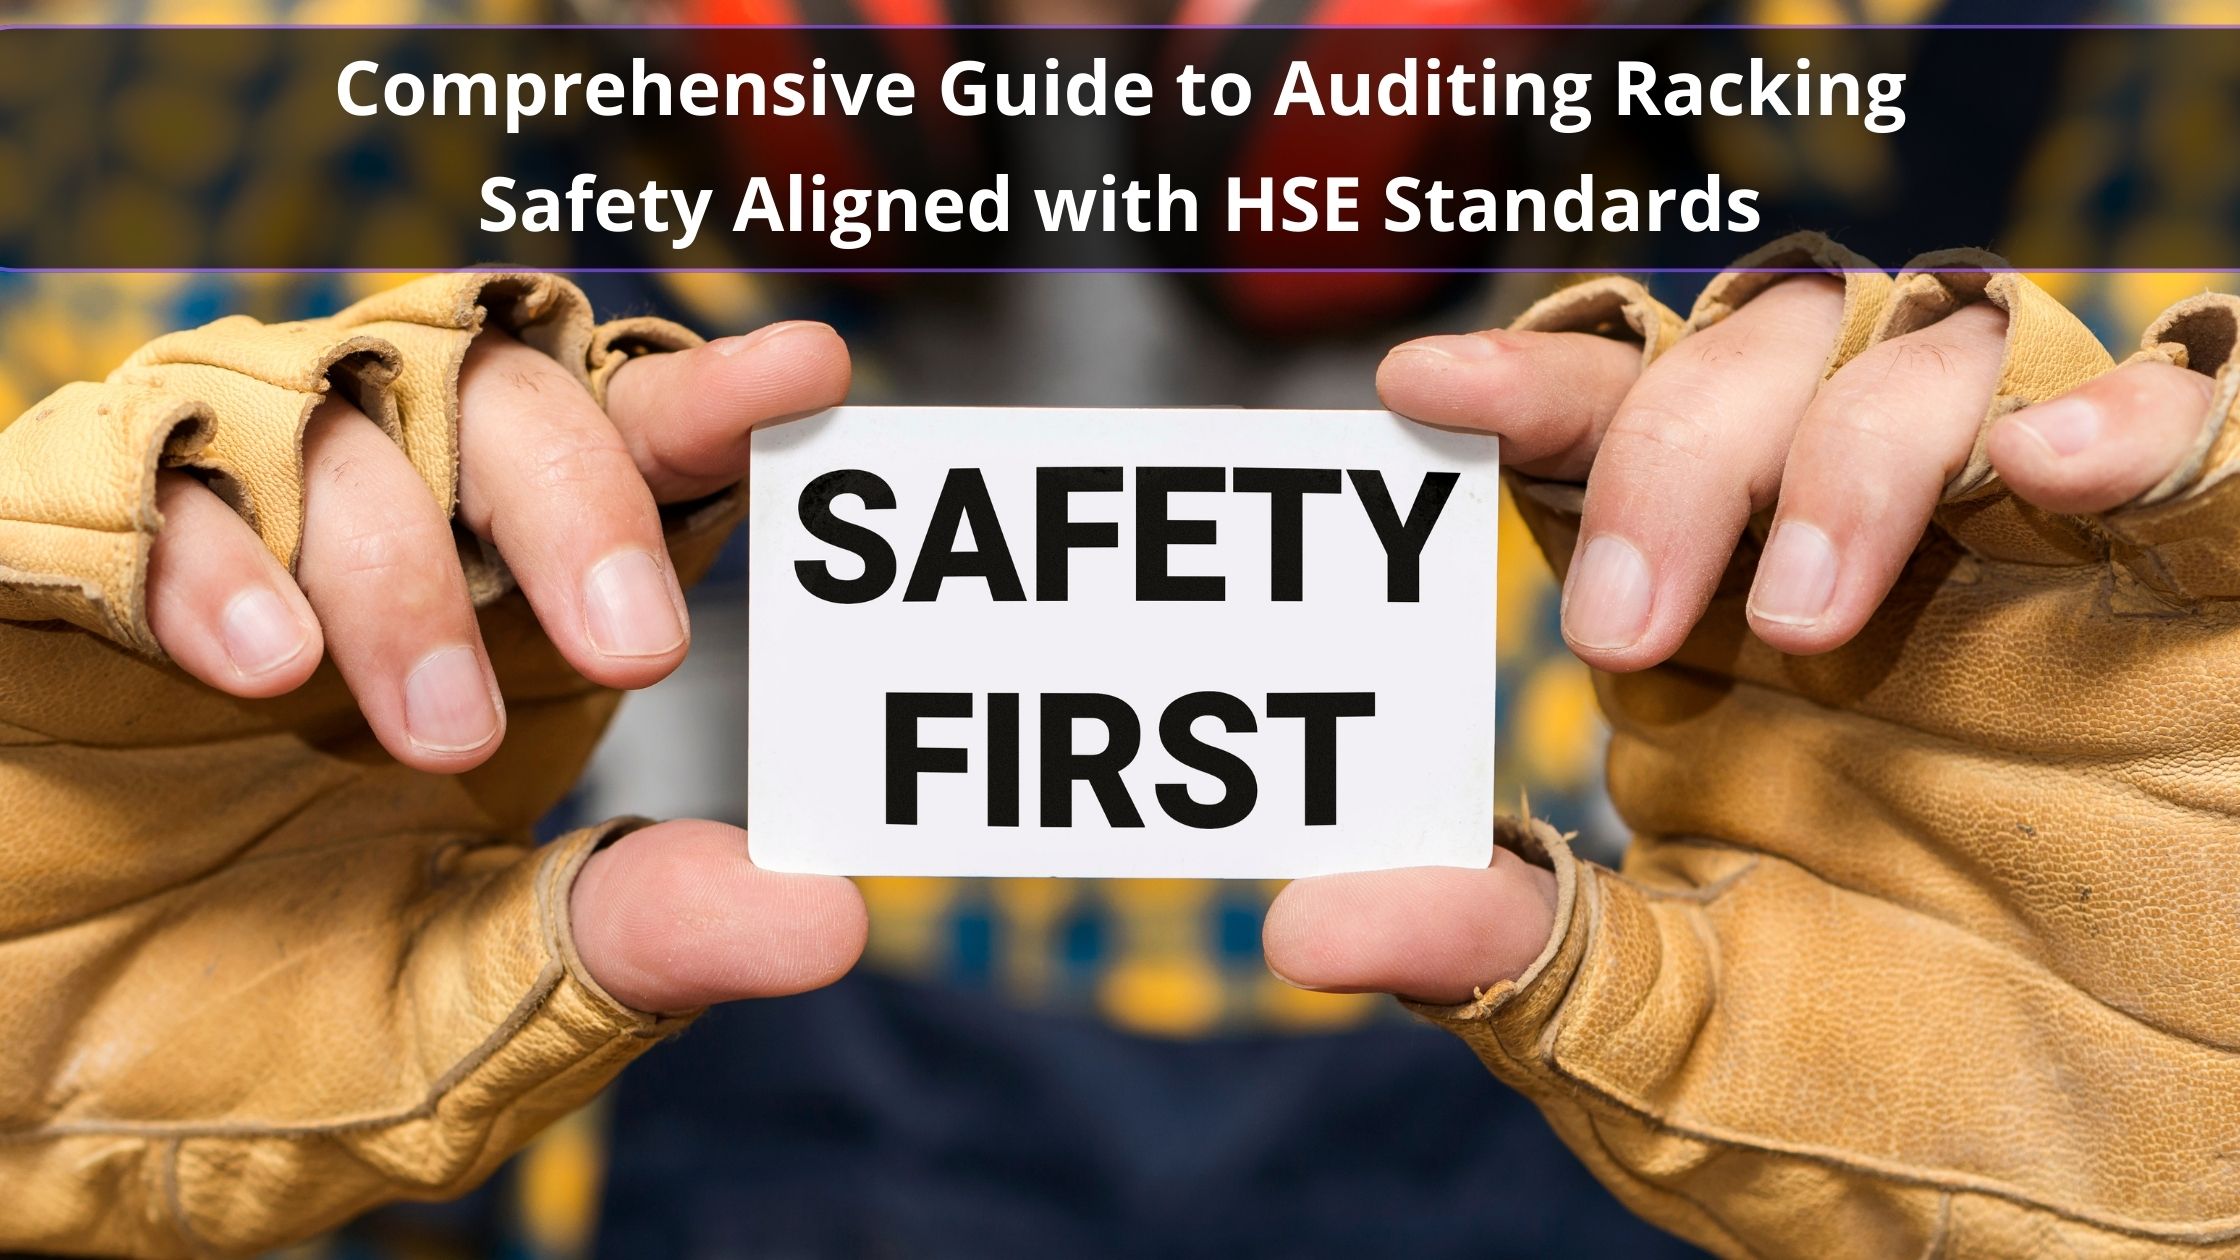 A Step-by-Step Guide to Racking Inspections in Line with HSE Standards